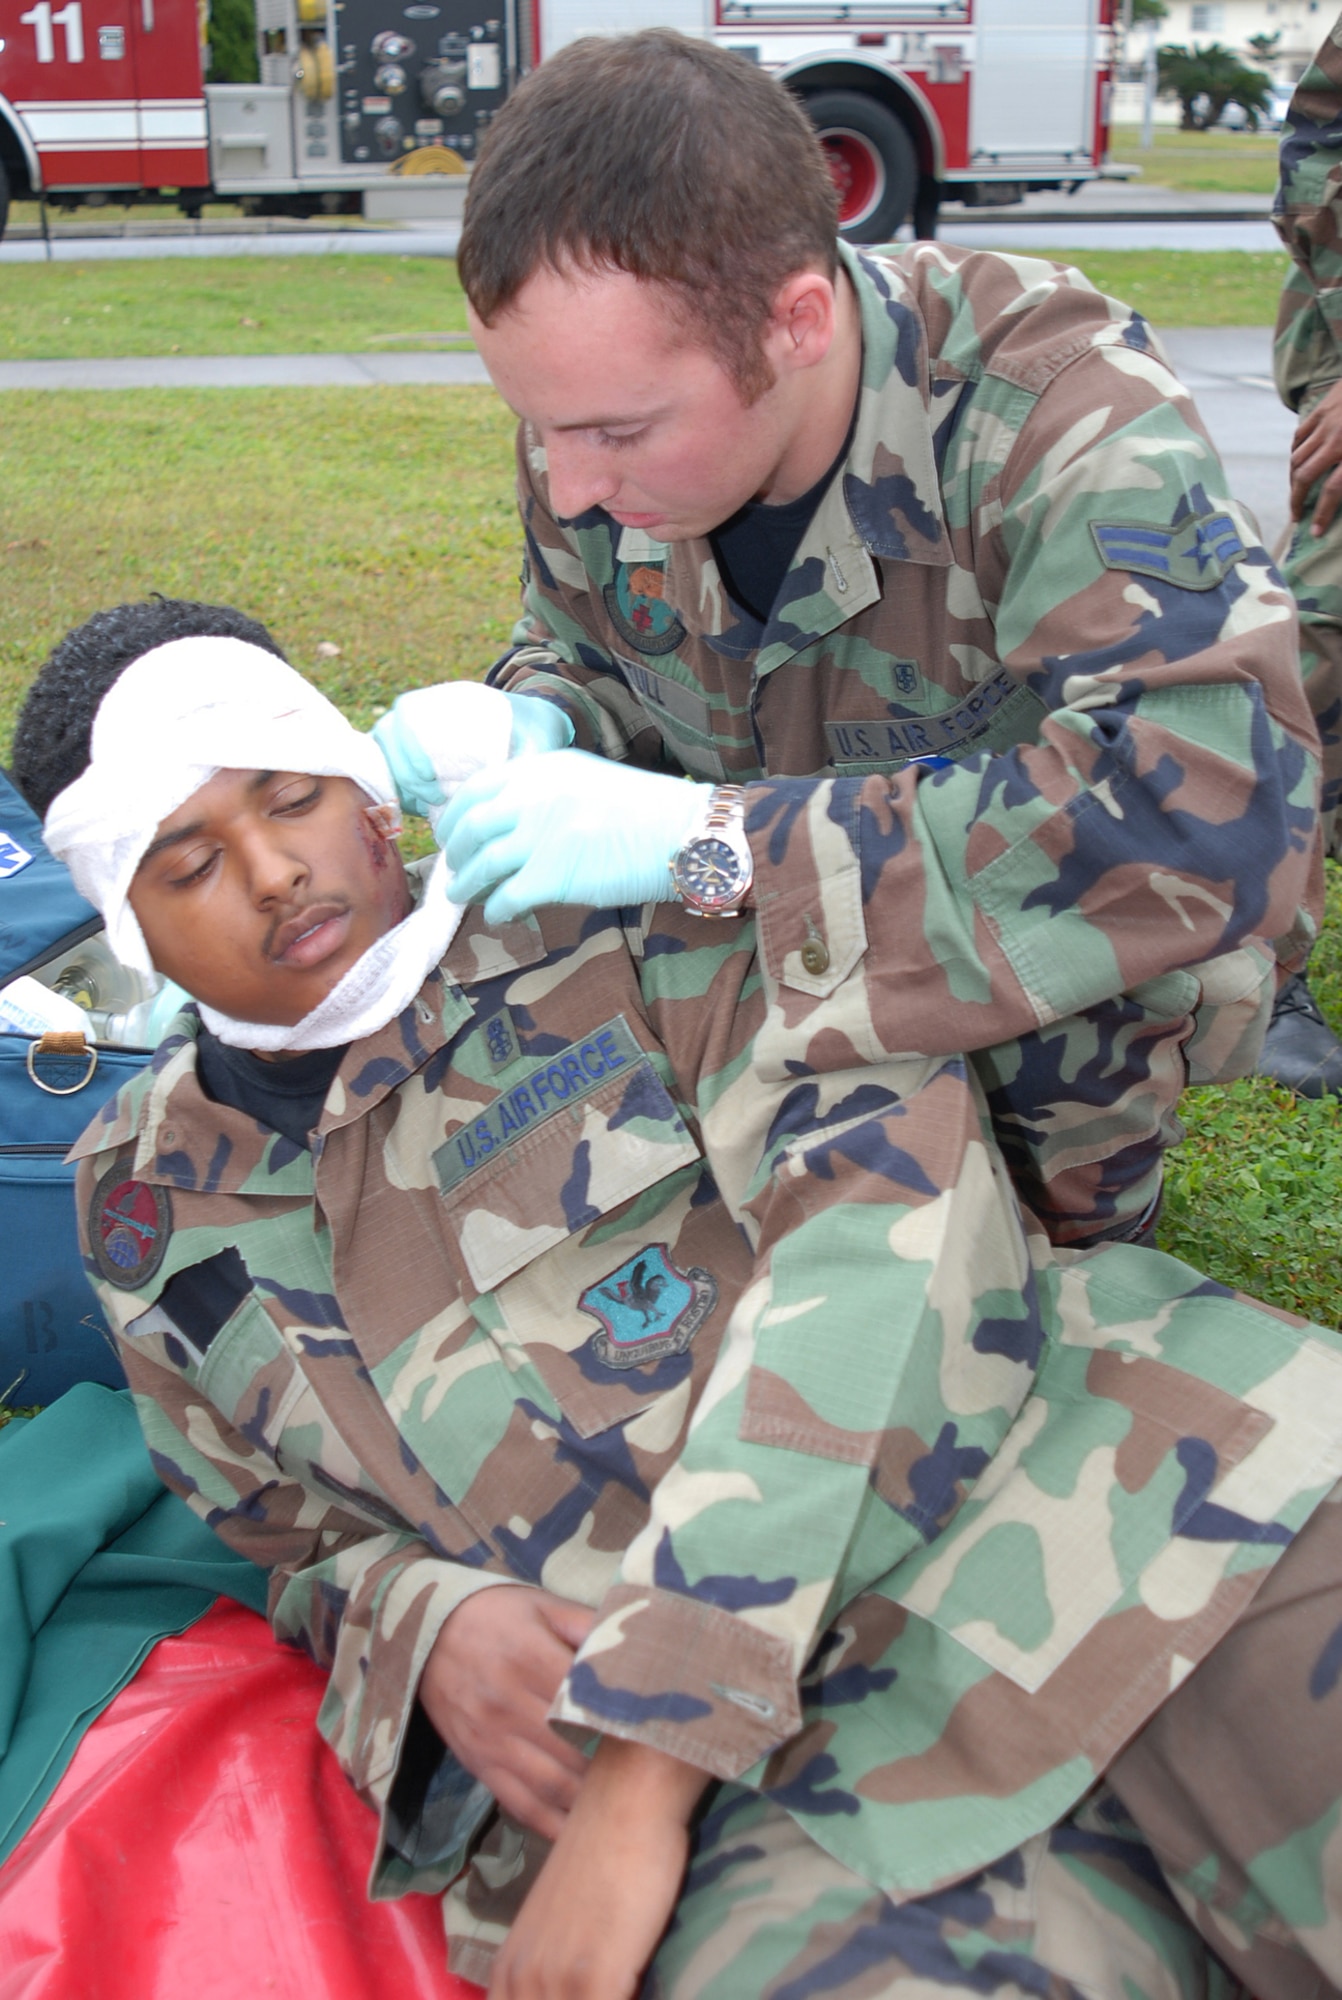 Airman First Class Michael Stull, 18th Aerospace Medical Squadron, bandages the head of a wounded victim following a simulated explosion of the Marshall Dining Facility during Local Operational Readiness Exercise Beverly High 08-3 at Kadena Air Base, Japan, Jan. 7, 2007. The 18th Wing exercise from Jan. 7 to 11 tests the wing's ability to respond in contingency situations.   (U.S. Air Force photo/Tech. Sgt. Dave DeRemer)